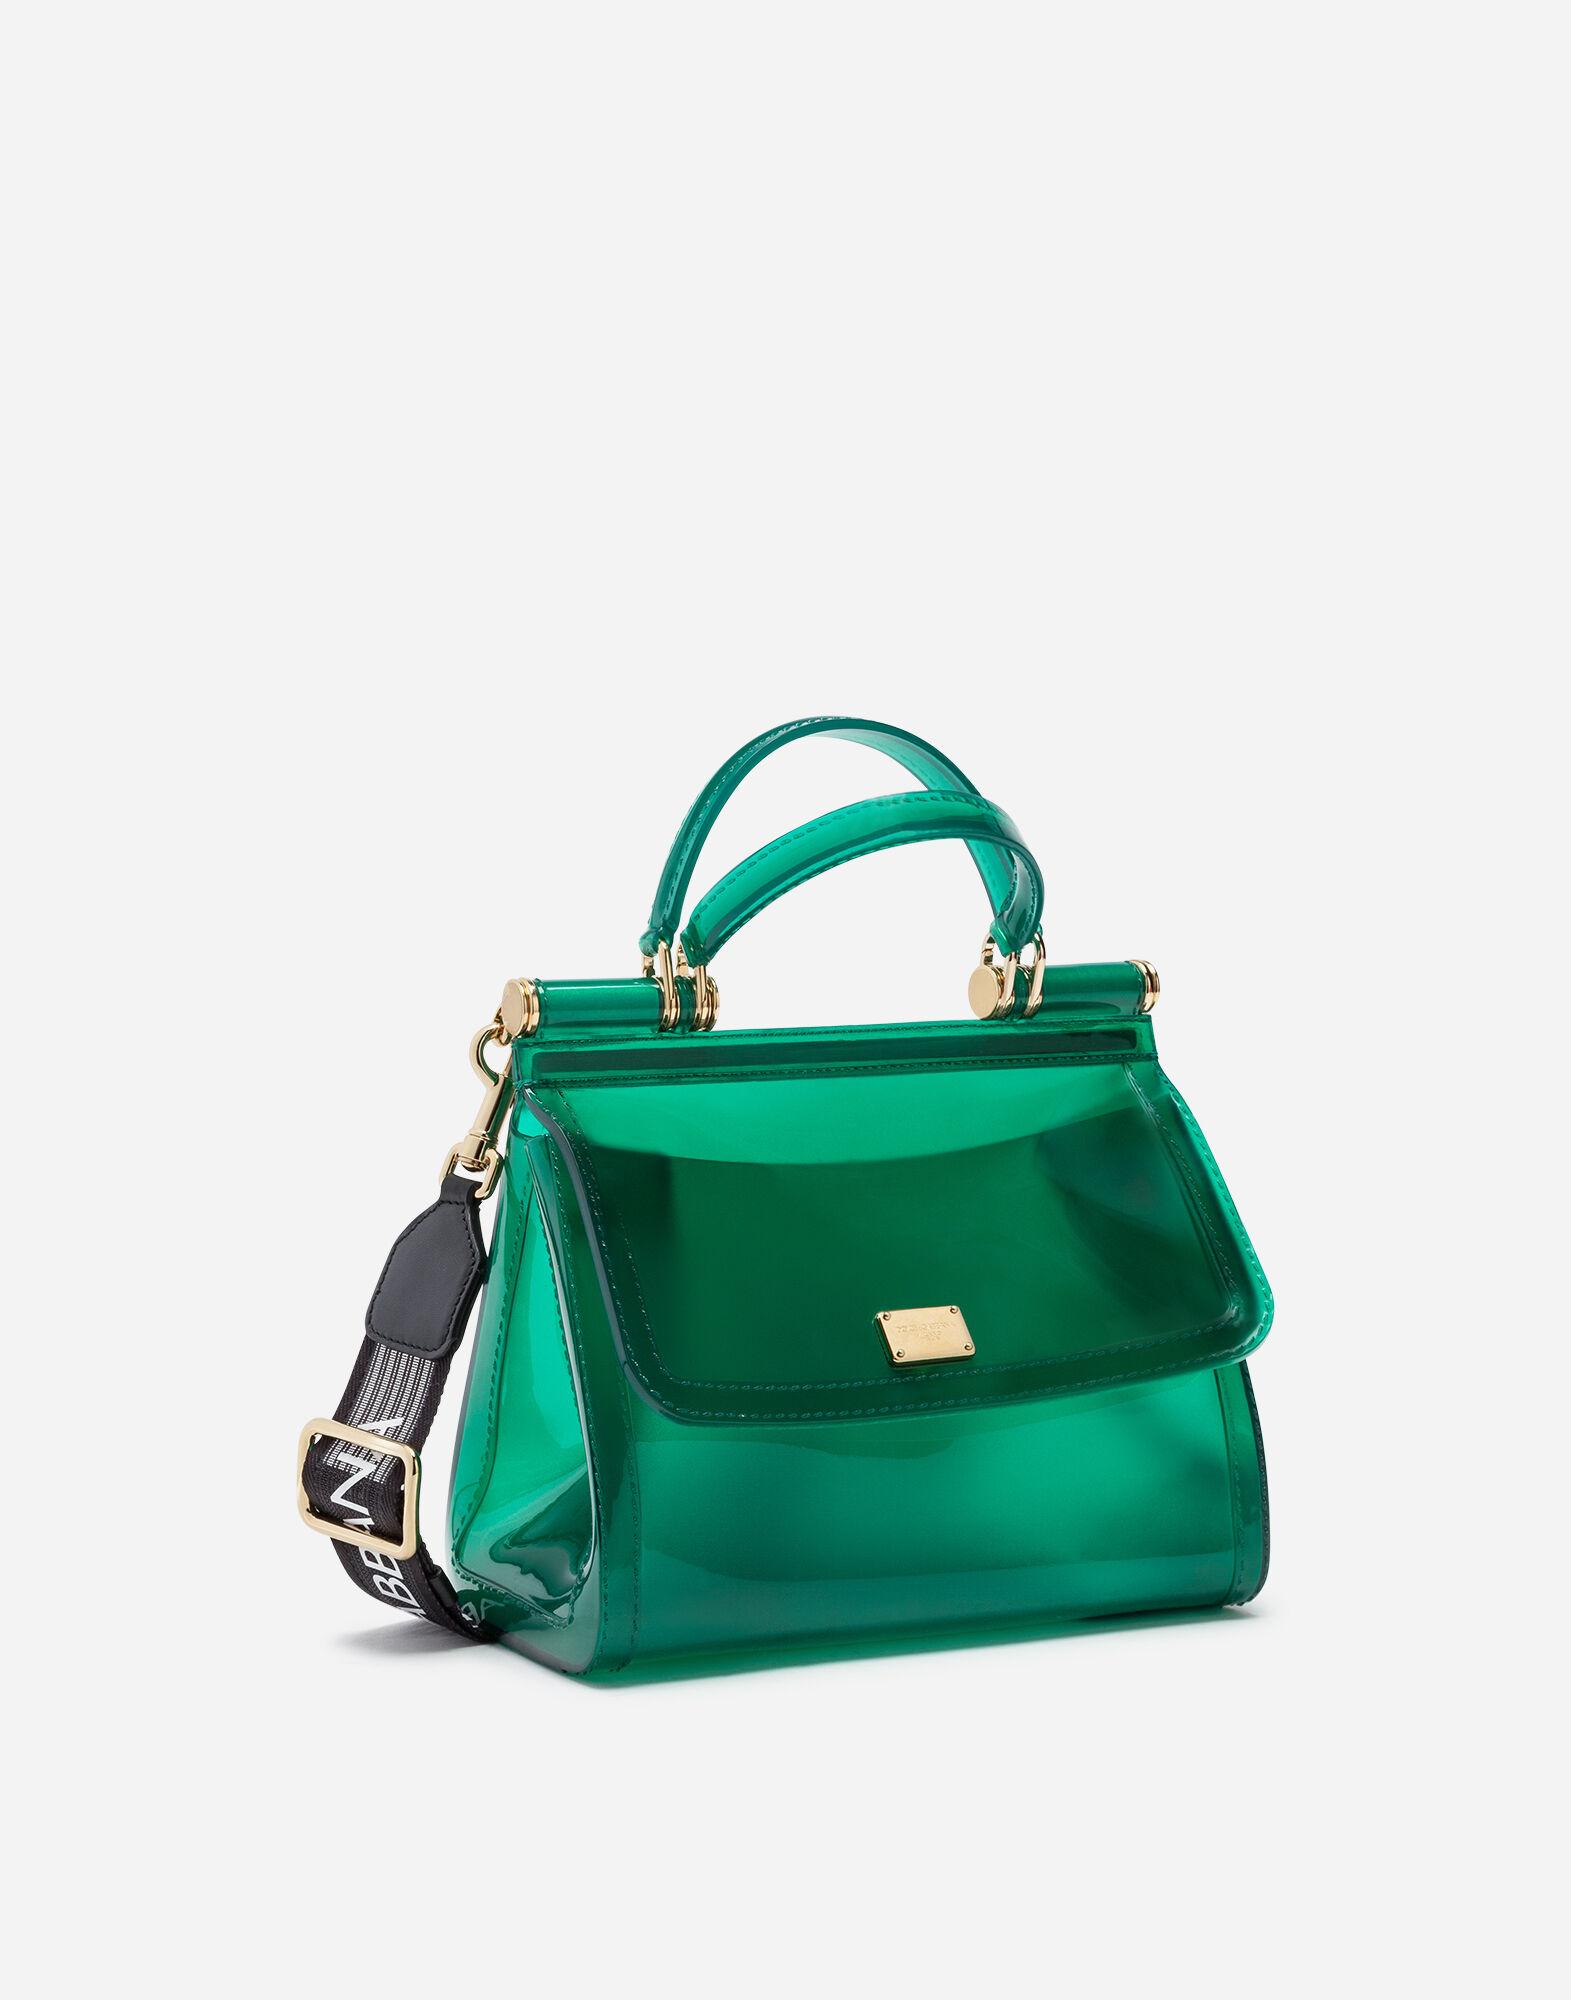 Dolce & Gabbana Sicily Translucent Top Handle Bag in Green | Lyst